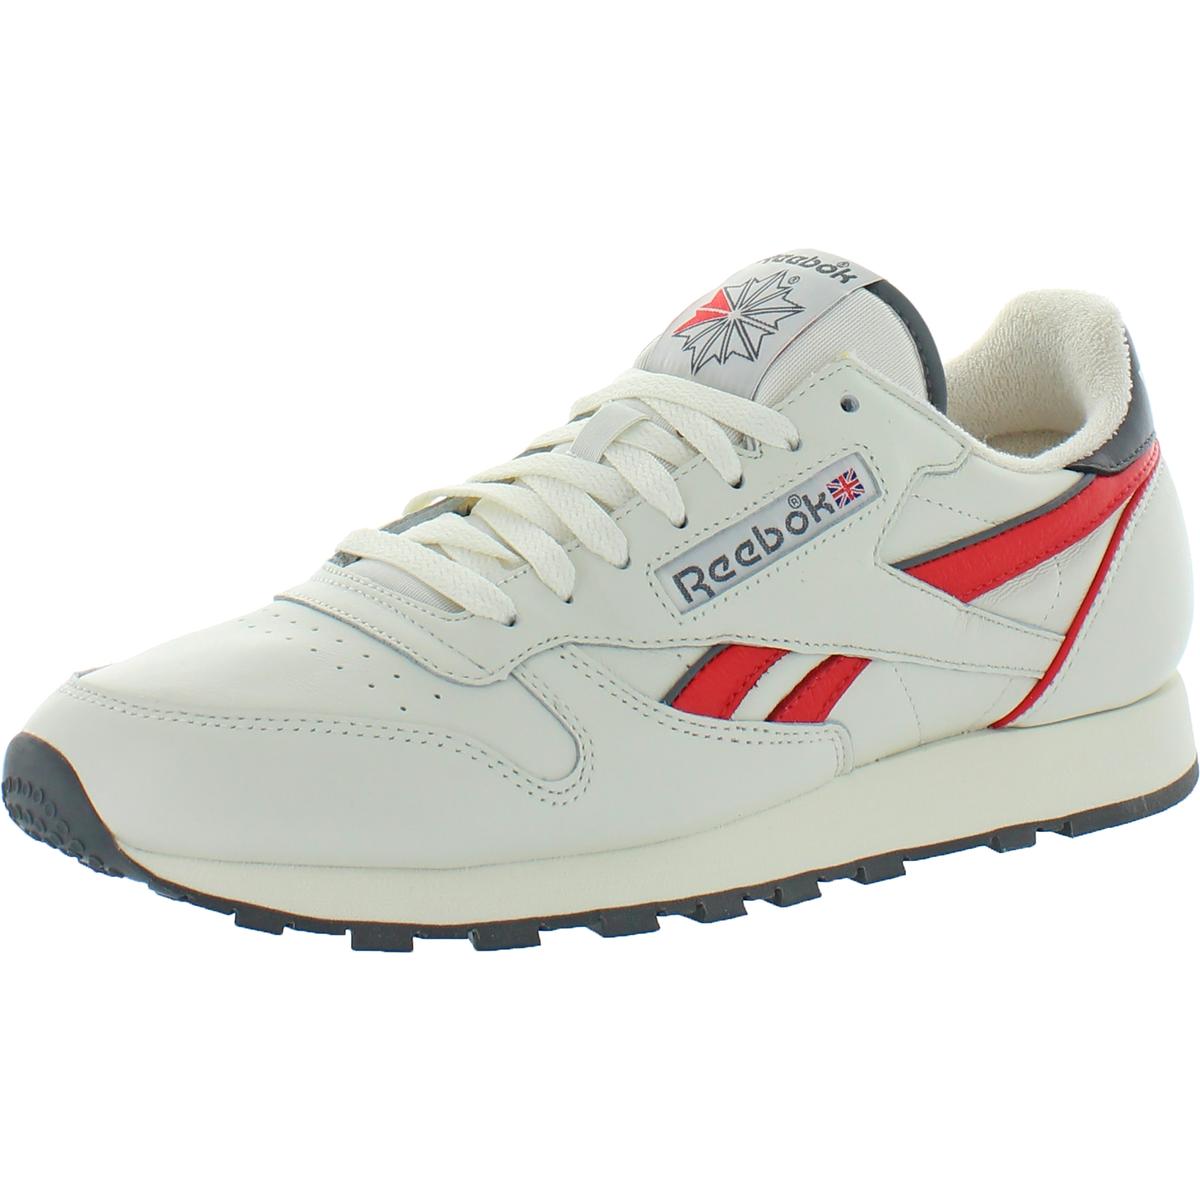 Hunger Surprised Wording Reebok Classic Leather MU Mens Leather Fitness Running Shoes